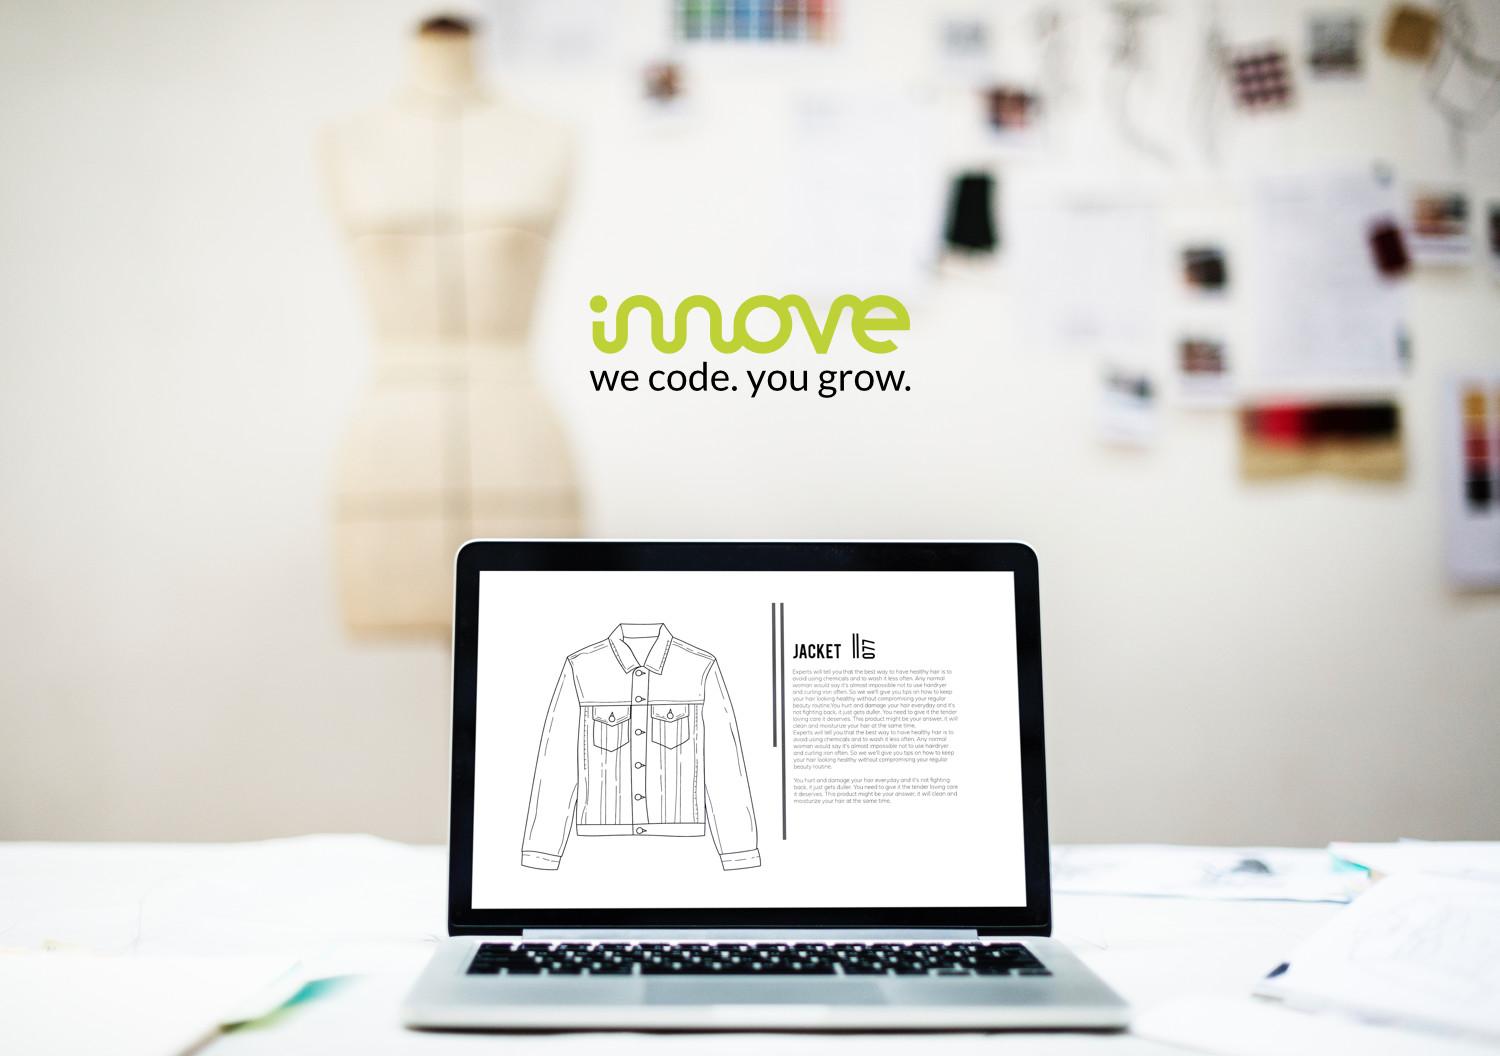 System integration for the fashion industry